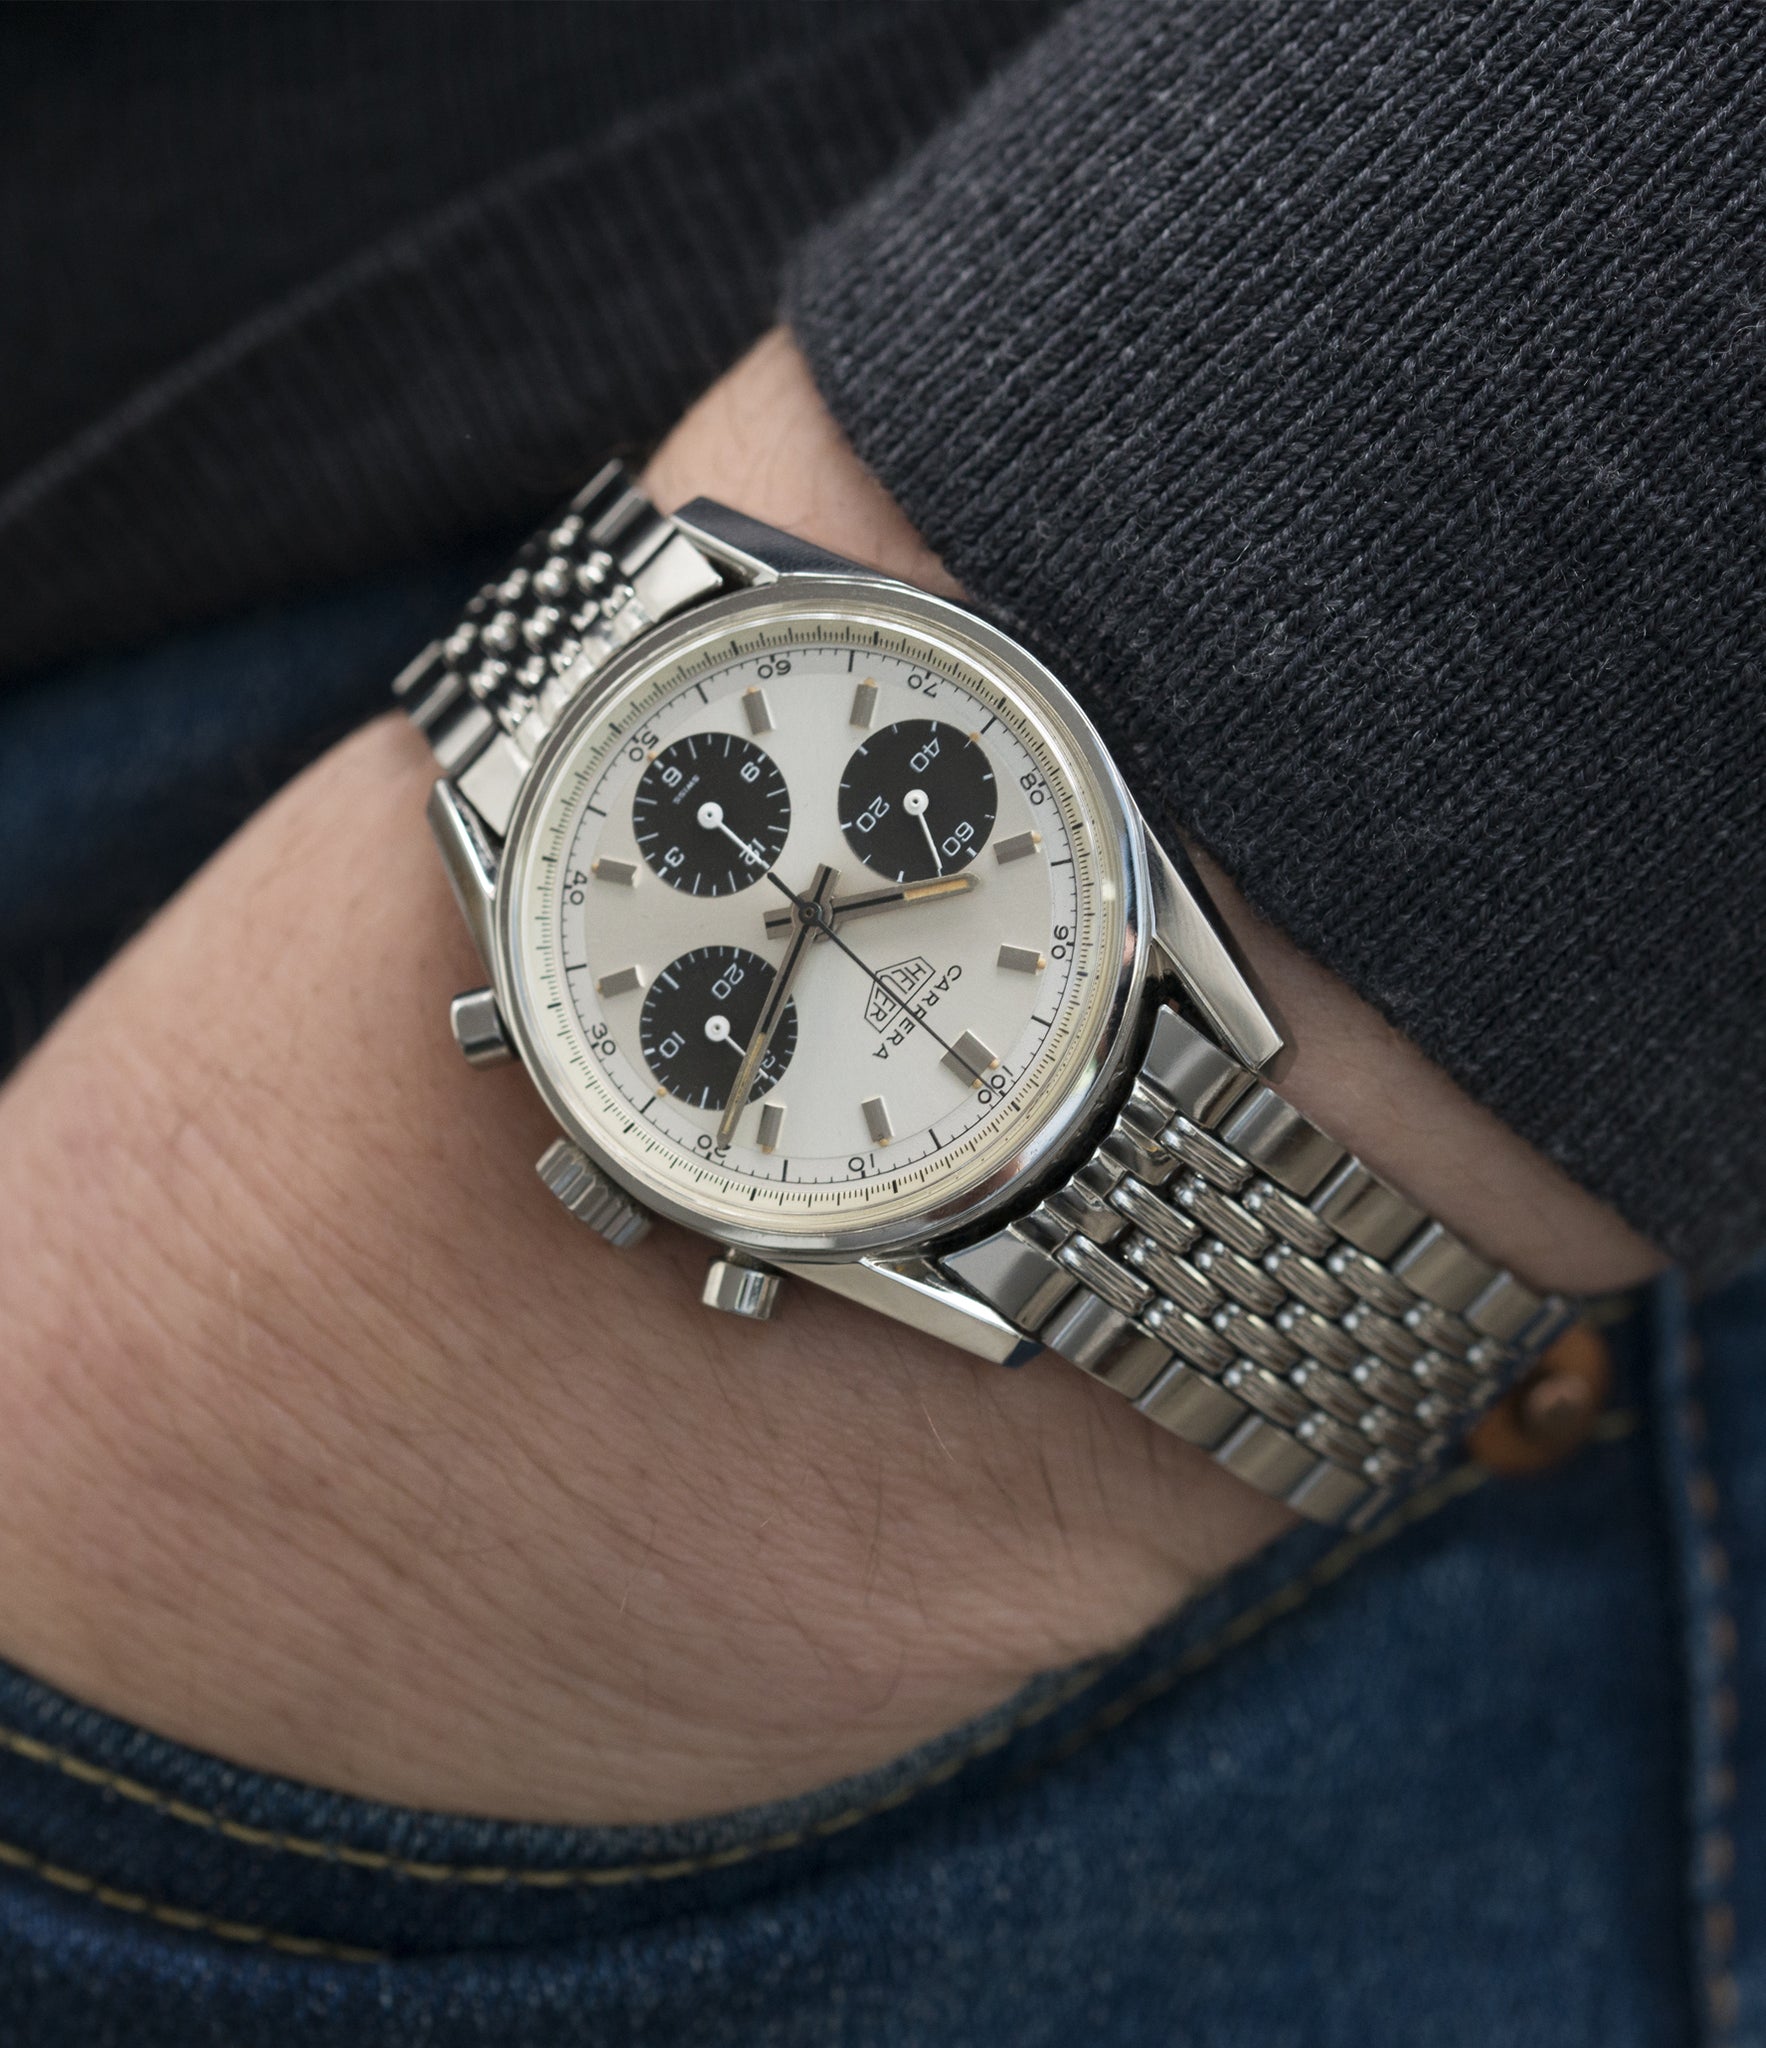 vintage sports wristwatch Heuer Carrera 2447SND panda dial steel sport watch online at A Collected Man London UK specialist of rare vintage watches